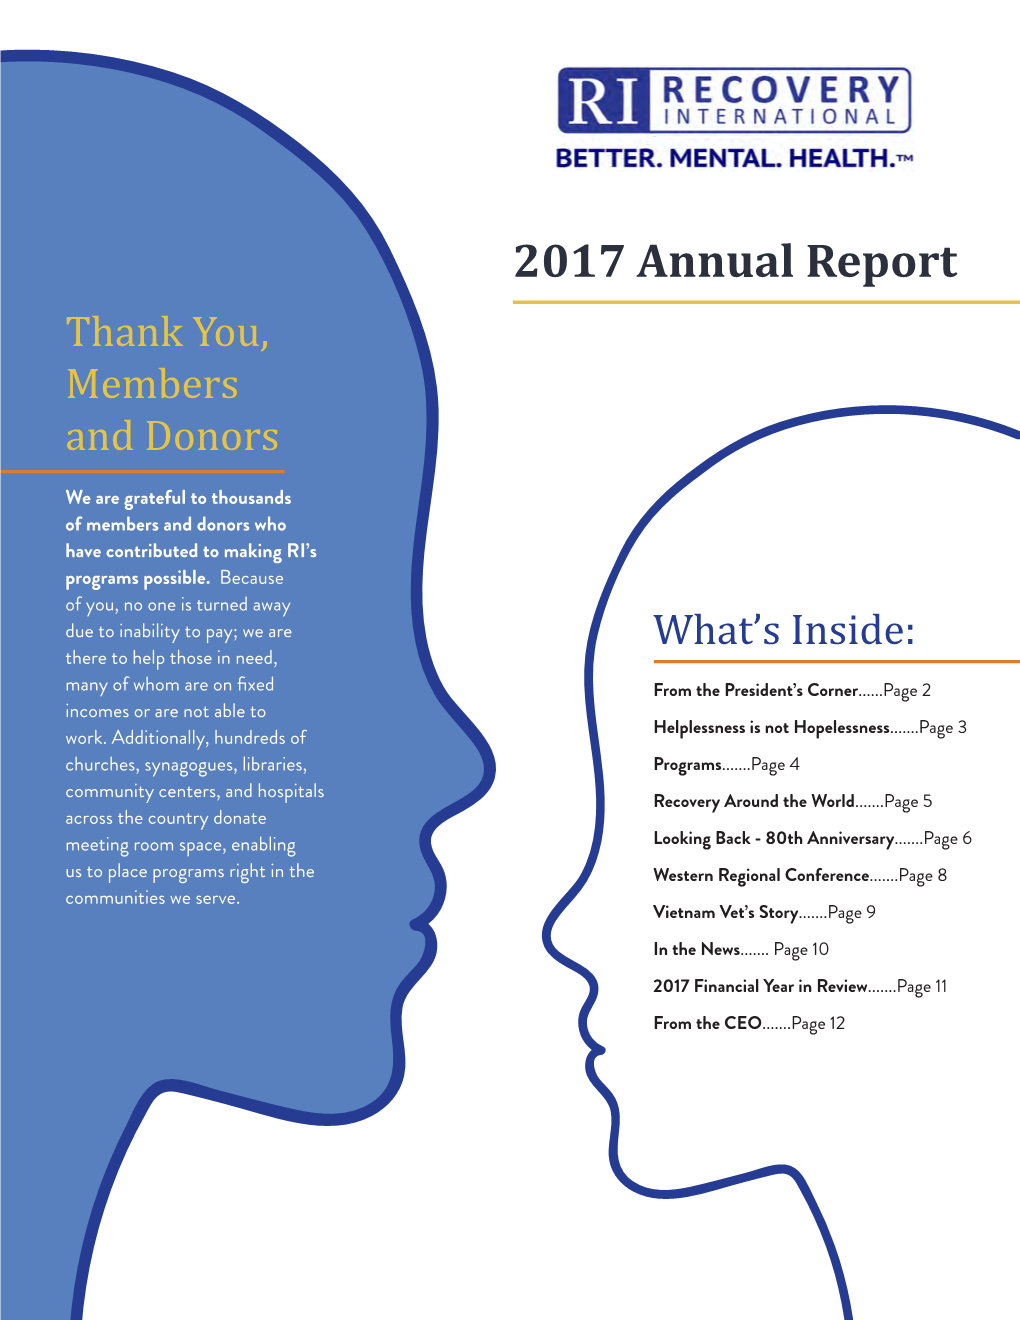 2017 Annual Report Thank You, Members and Donors